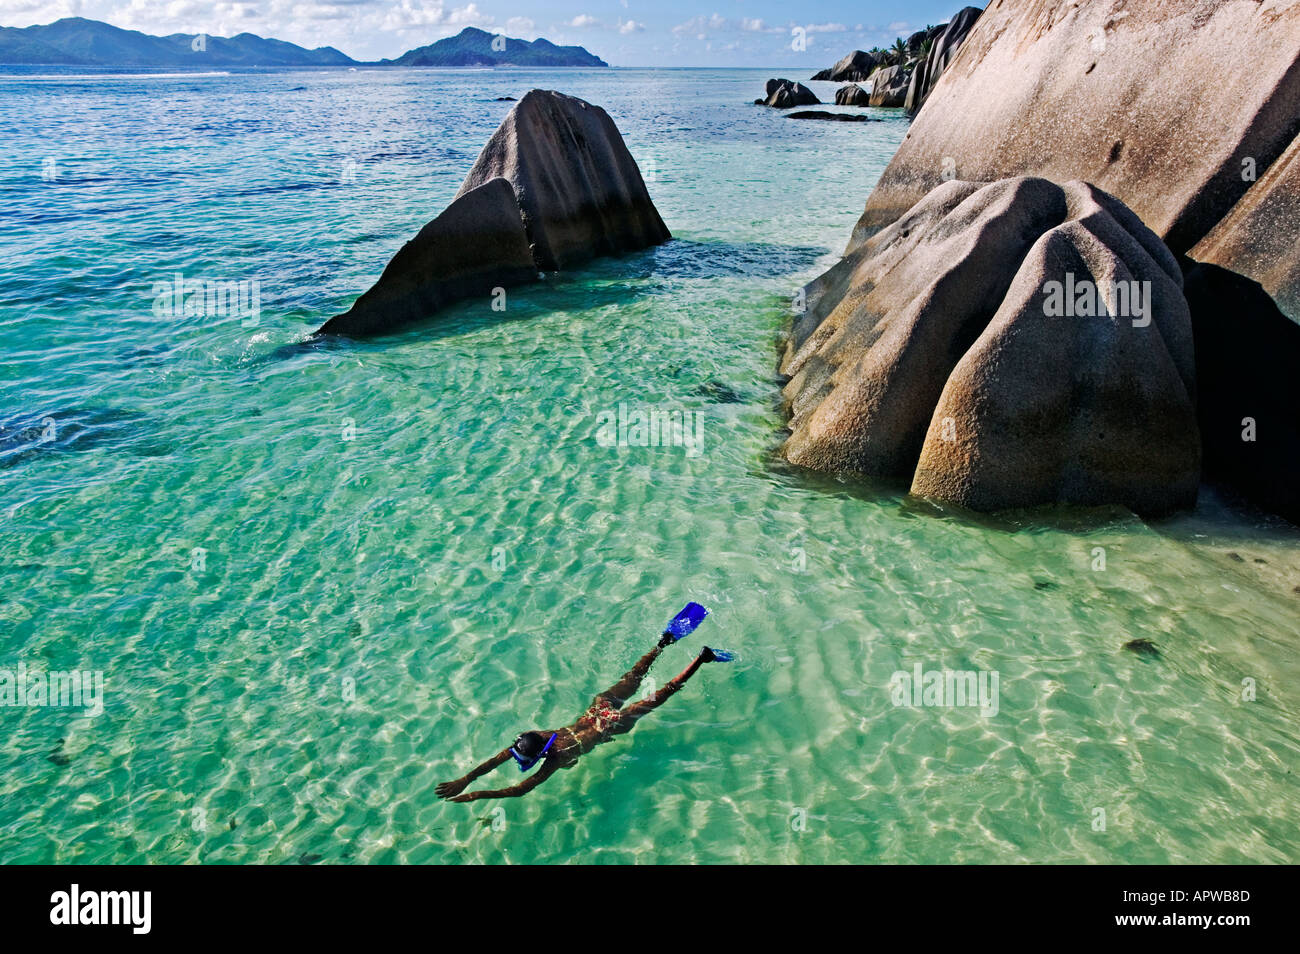 Woman snorkling in clear water amongst granite boulders Model released Anse Source d Argent beach La Digue Island Seychelles Stock Photo